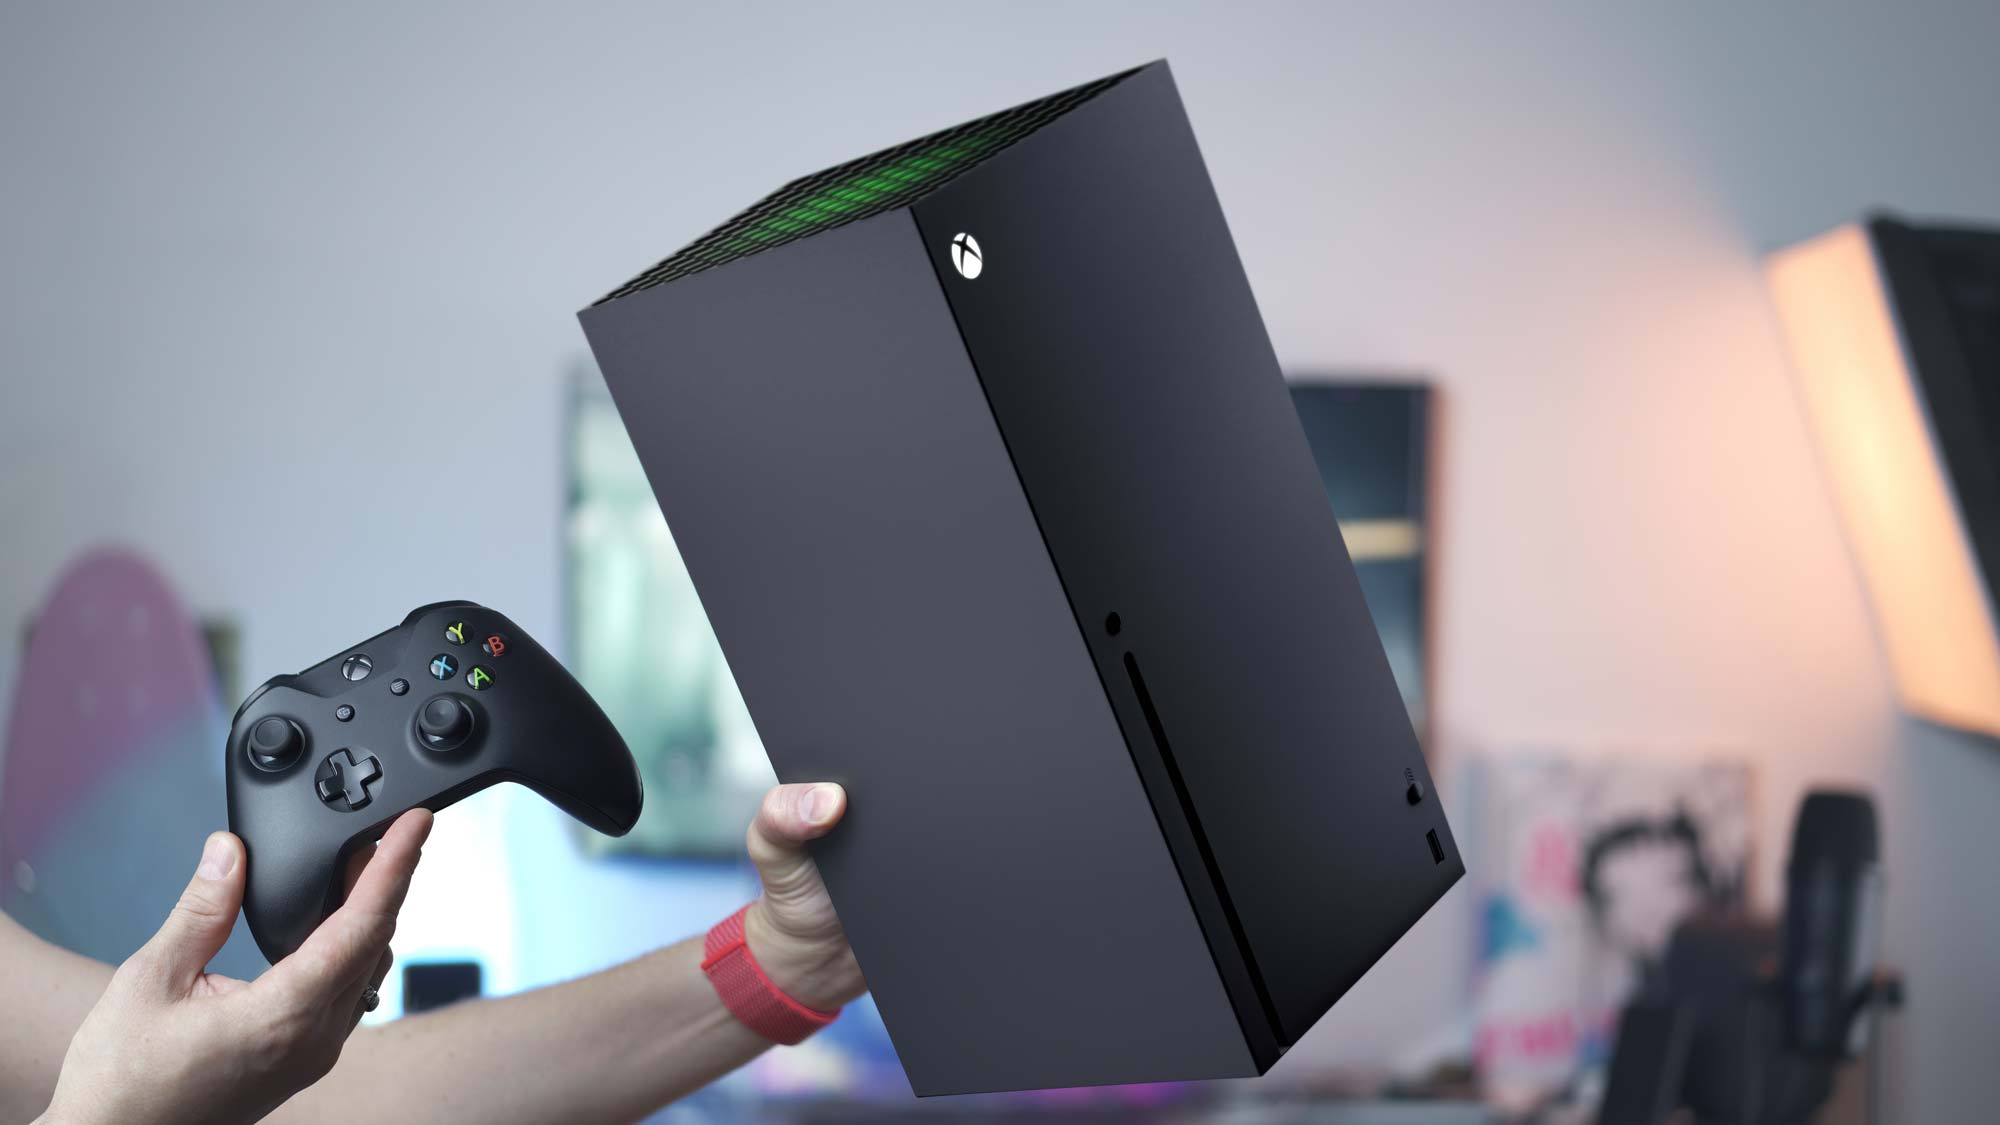 Xbox Series X Restock Tracker: Walmart Has Stock, But There's A Catch